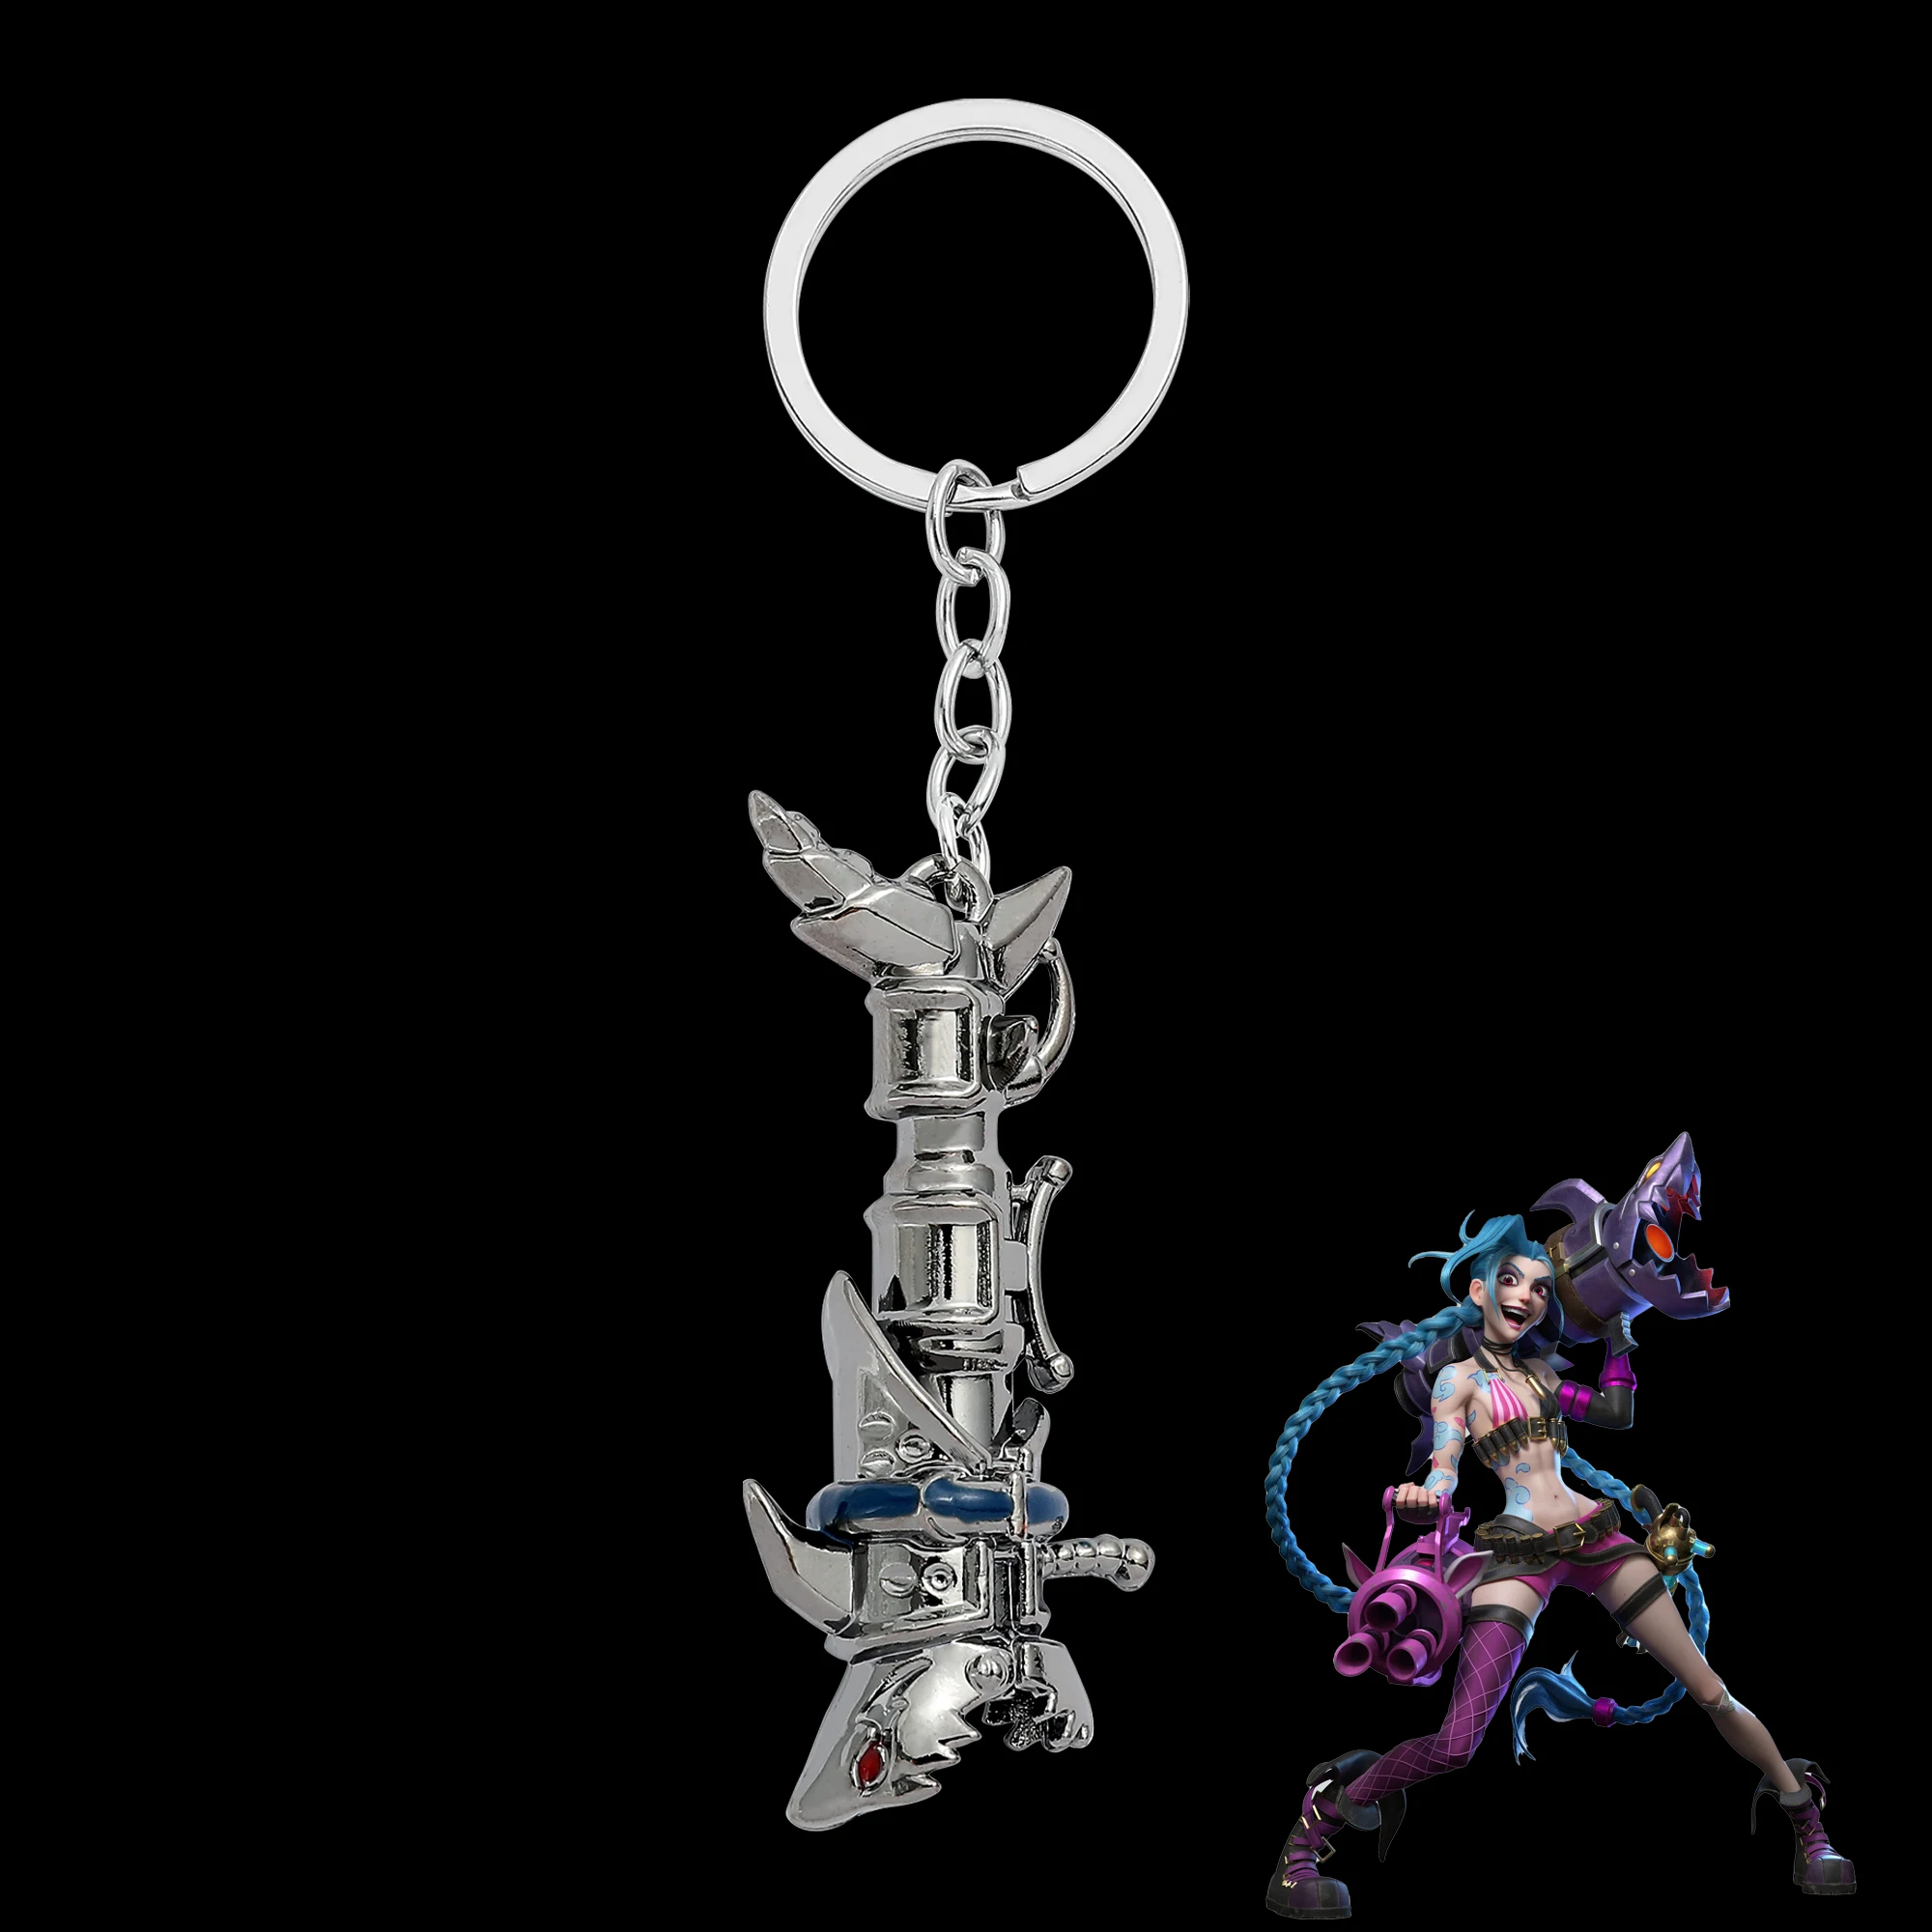 

League of Legends Game Figure Anime Arcane Jinx Keychain Shark Style Grenade Launcher Model Keyrings for Backpack Accessories